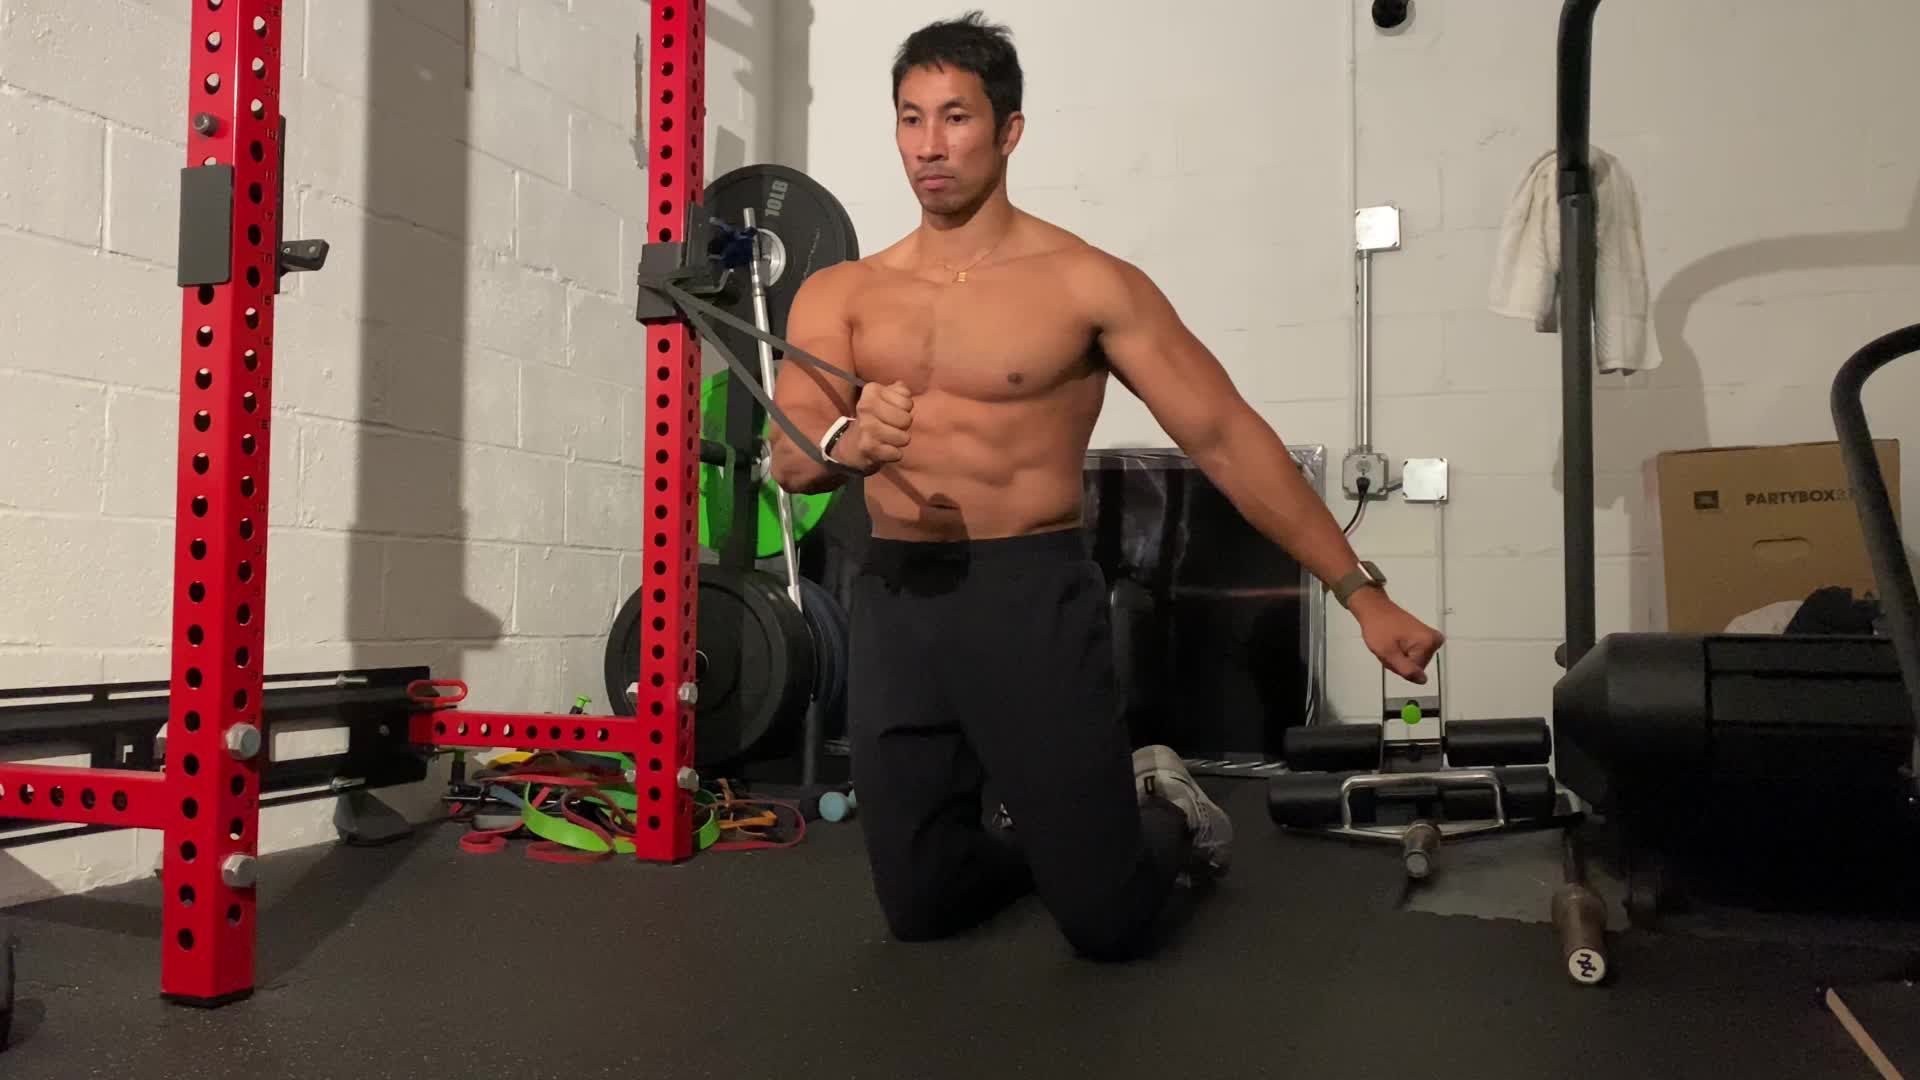 MirrorAthlete - Inner Pec Exercise Workout Routine. For bulk results  perform exercise as heavy as possible 4 sets x 4-6 reps every 3rd day. Join  Fitness and Healthy Lifestyle Change group Website